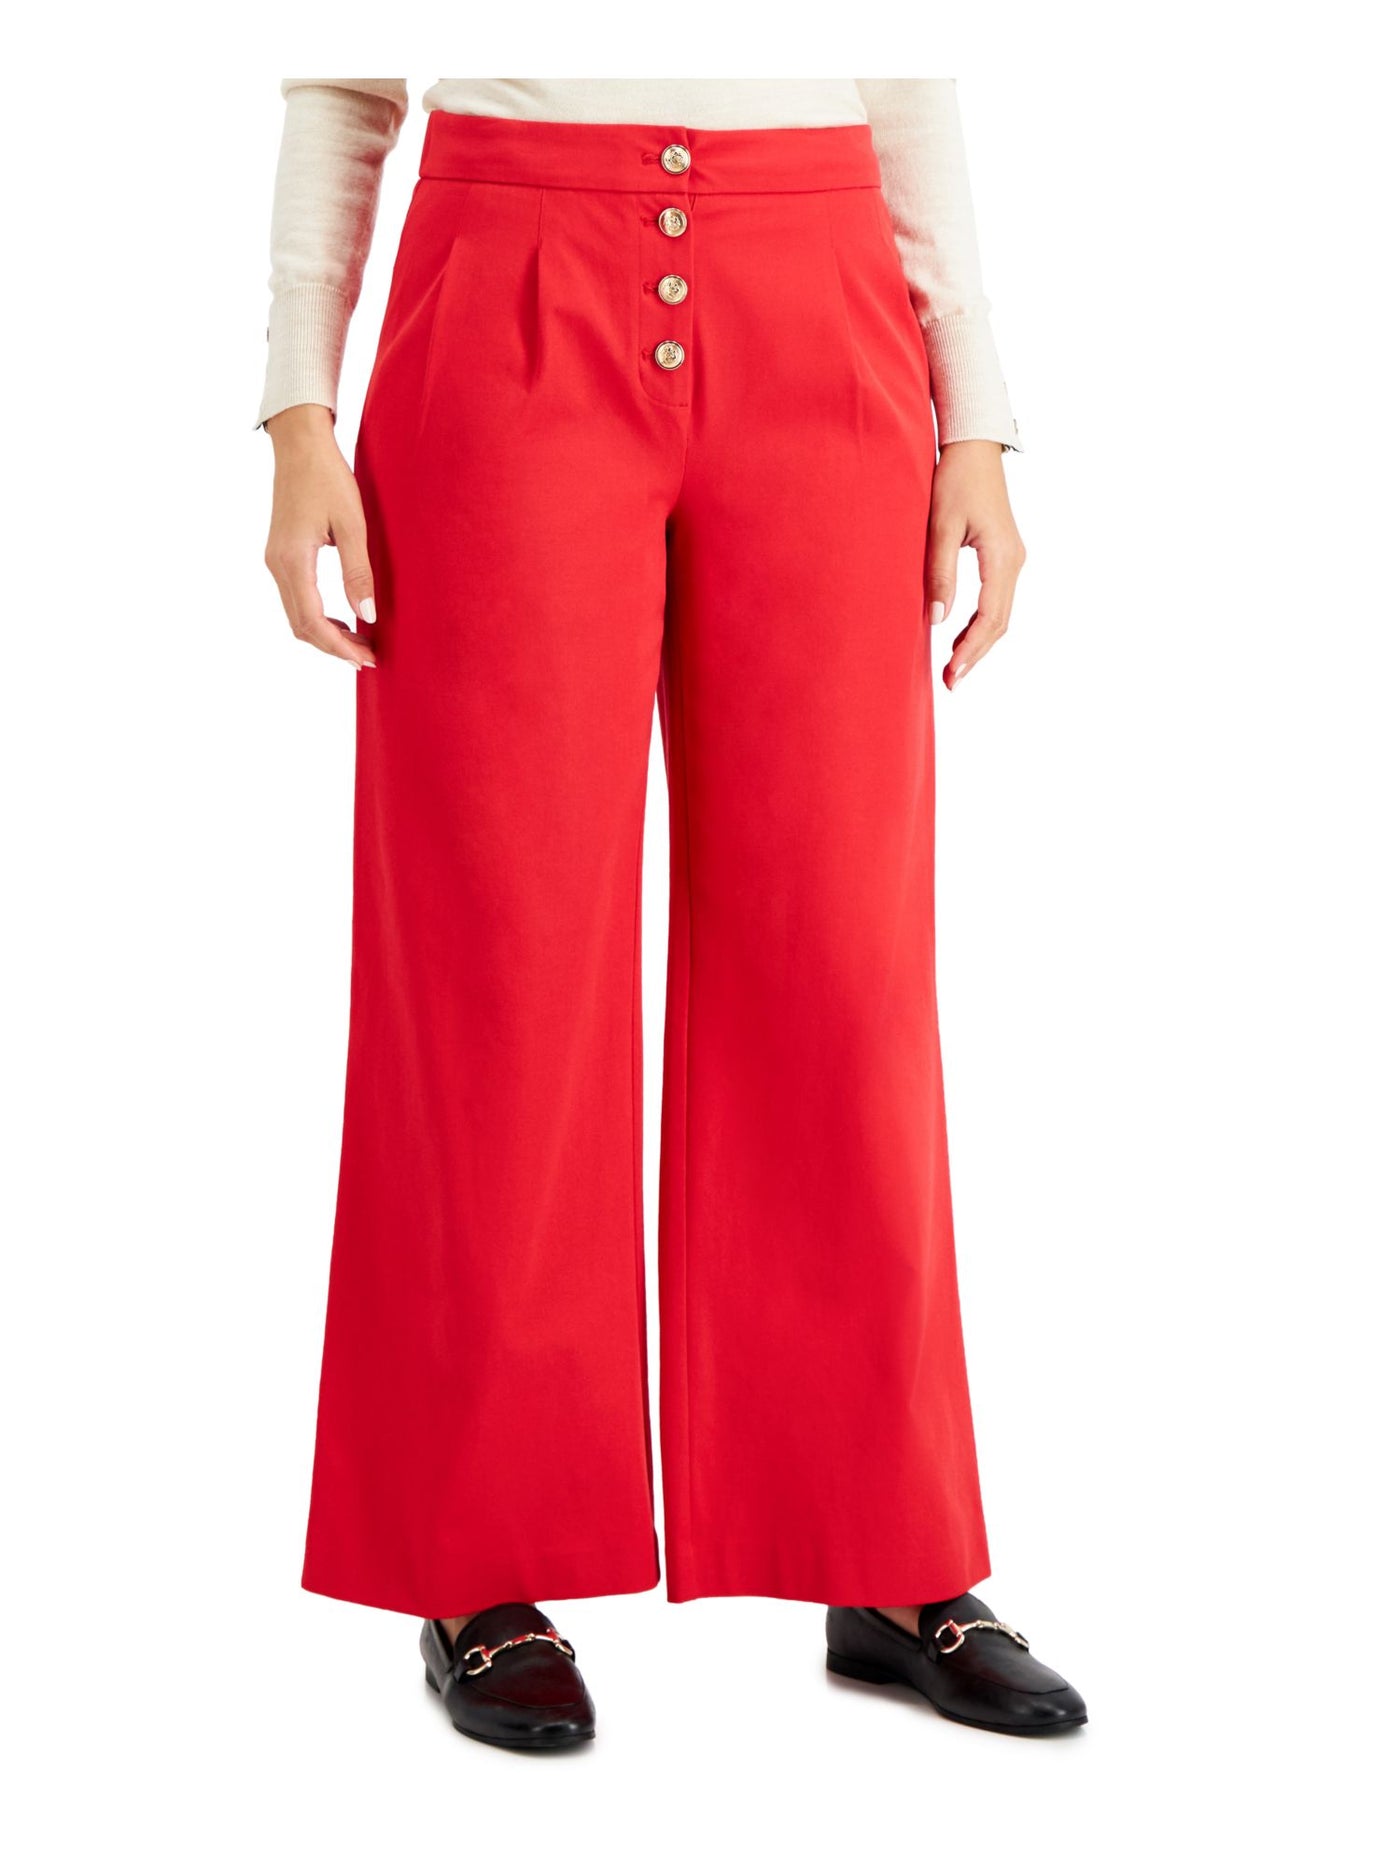 CHARTER CLUB Womens Red Stretch Pleated Pocketed Button Fly Wear To Work Wide Leg Pants 10